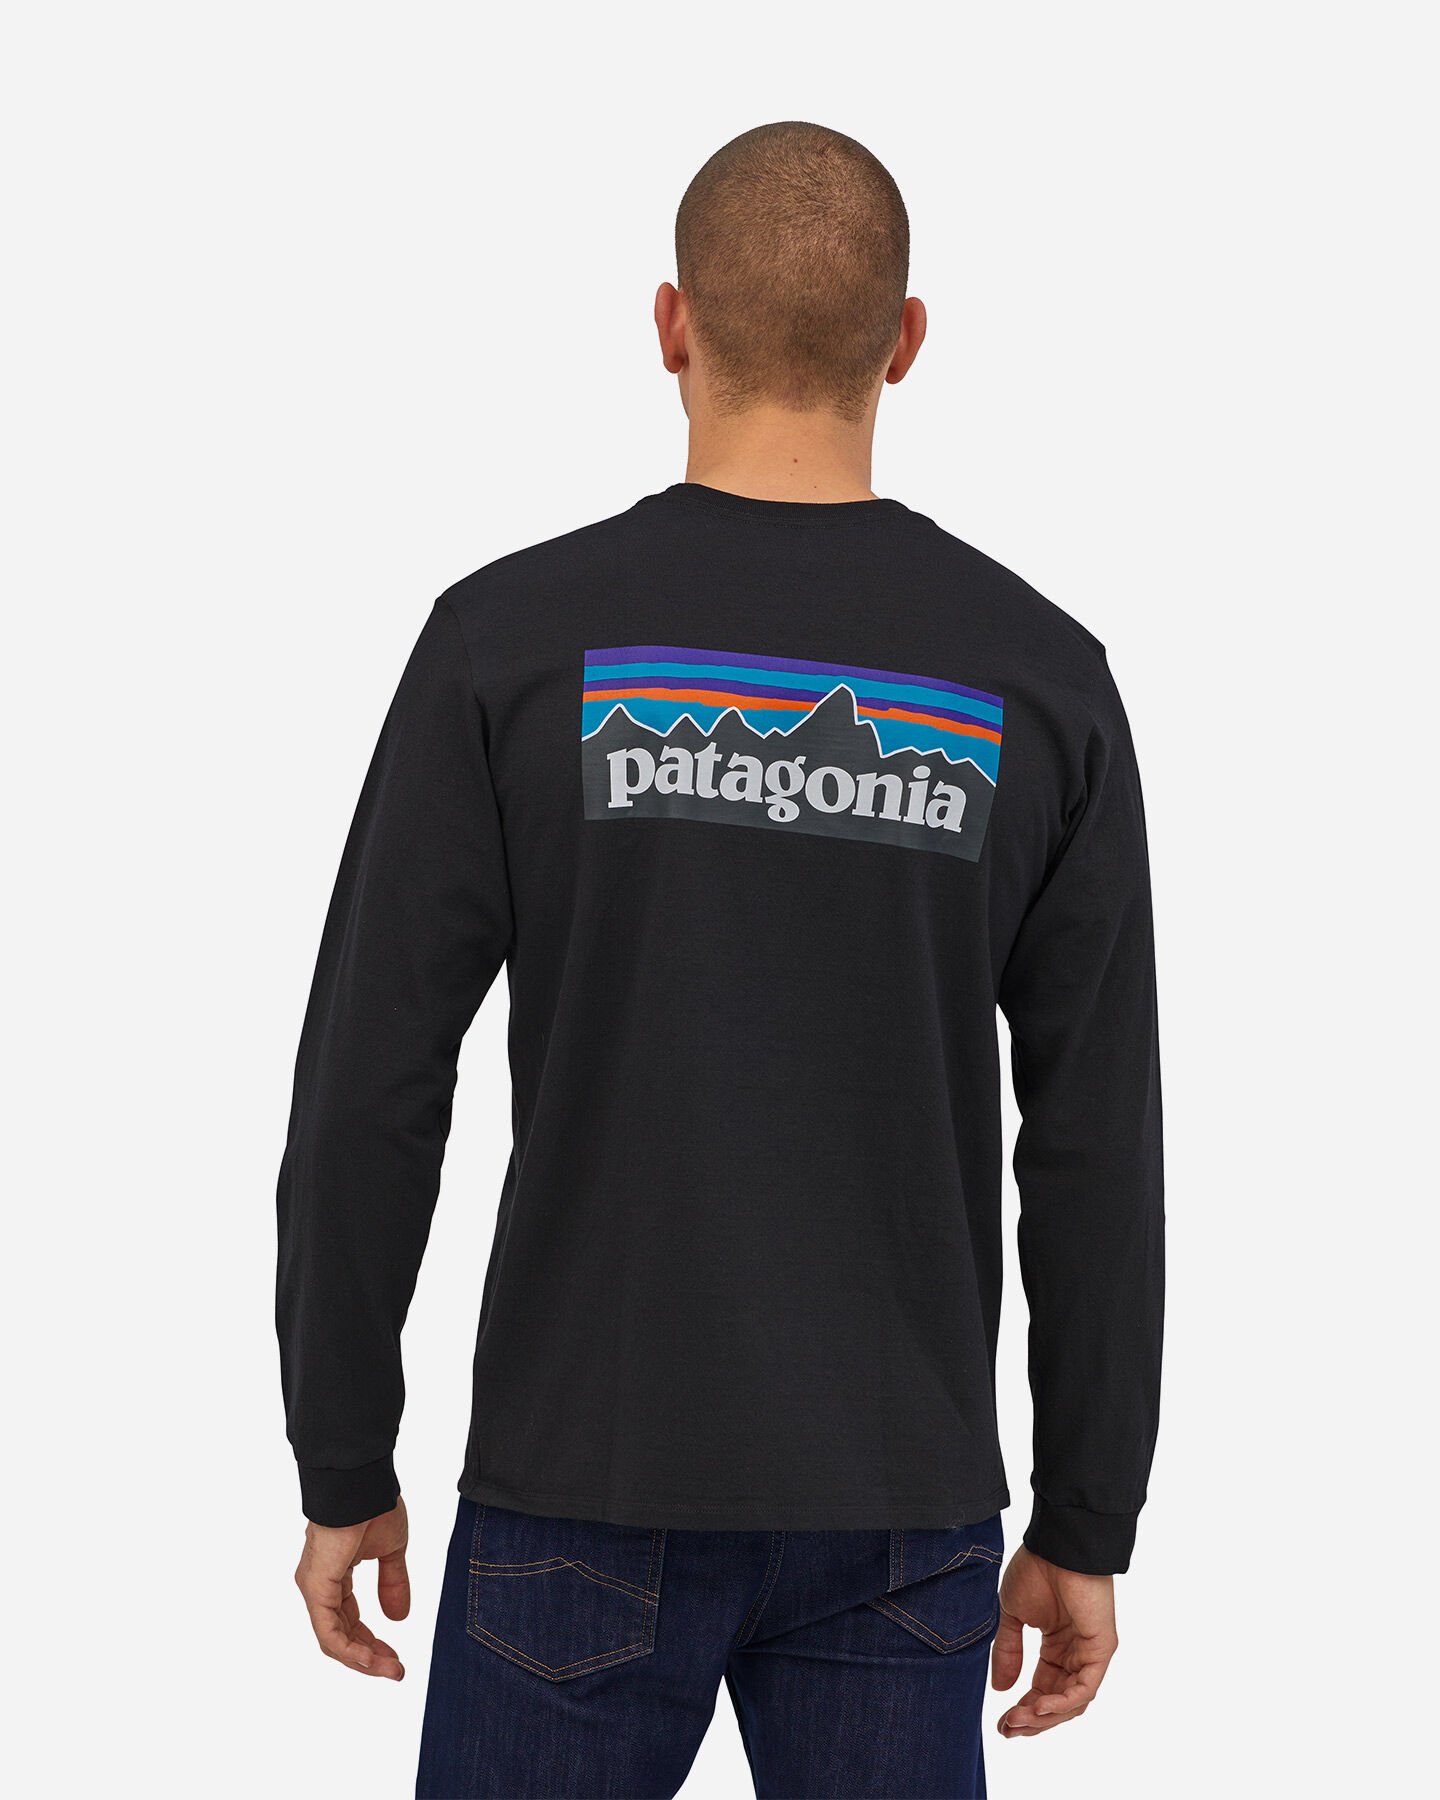  T-Shirt PATAGONIA P-6 LOGO M S4089229|BLK|M scatto 1